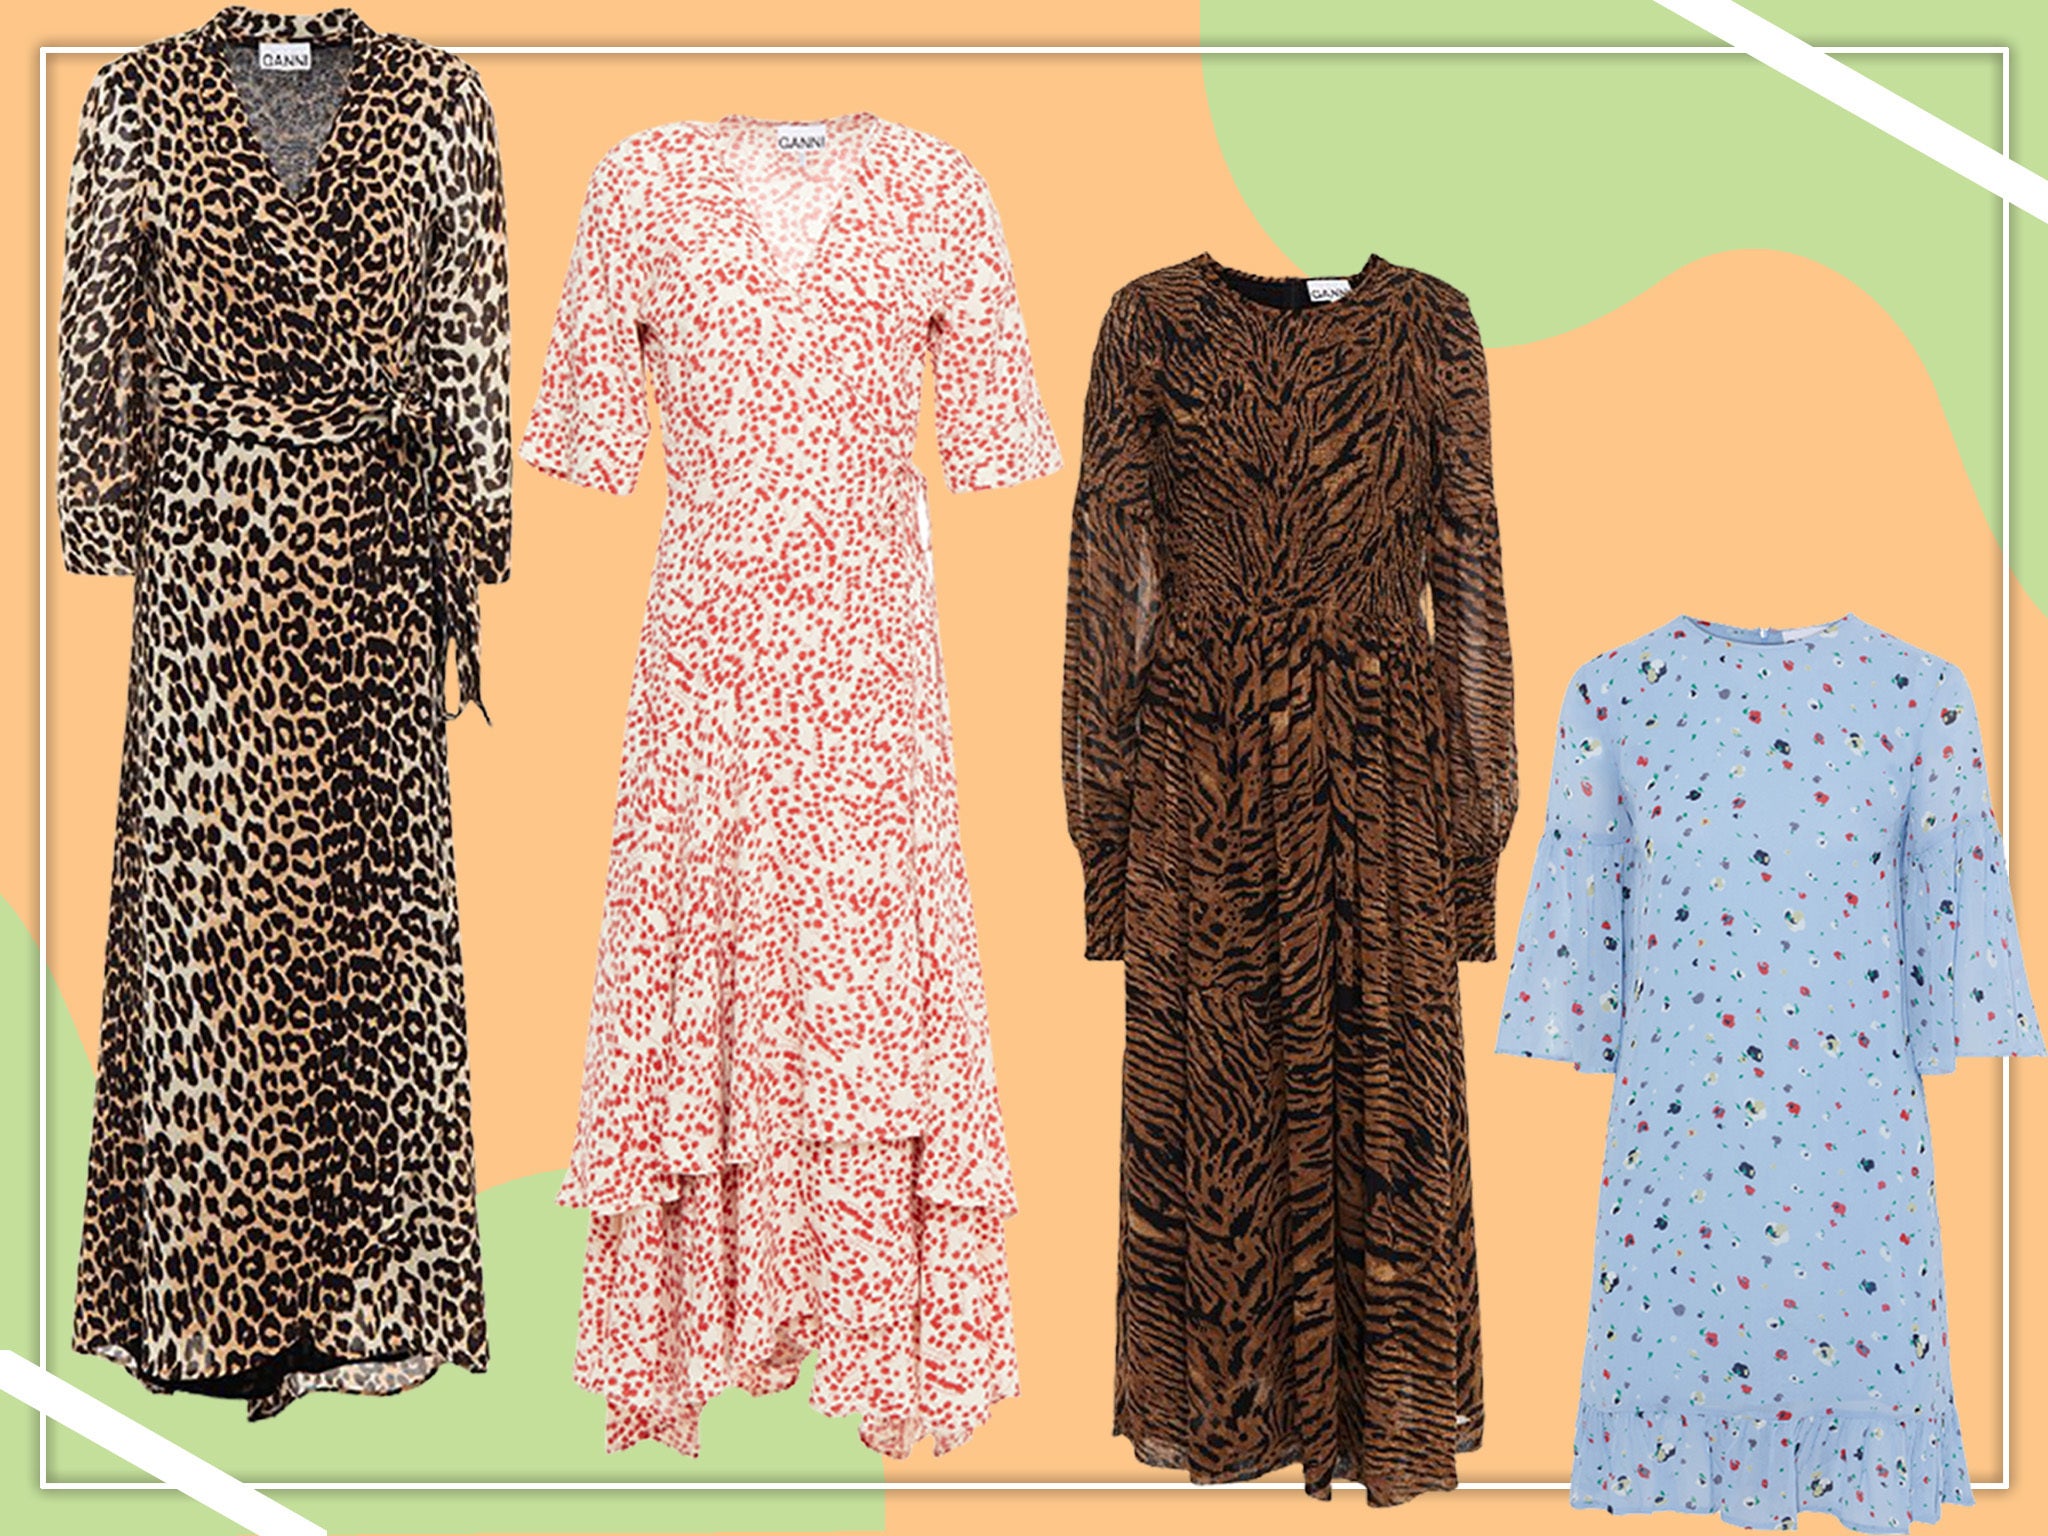 Much like the brand’s cult items, we predict these discounted dresses will fly off the shelves, so you’ll want to act fast